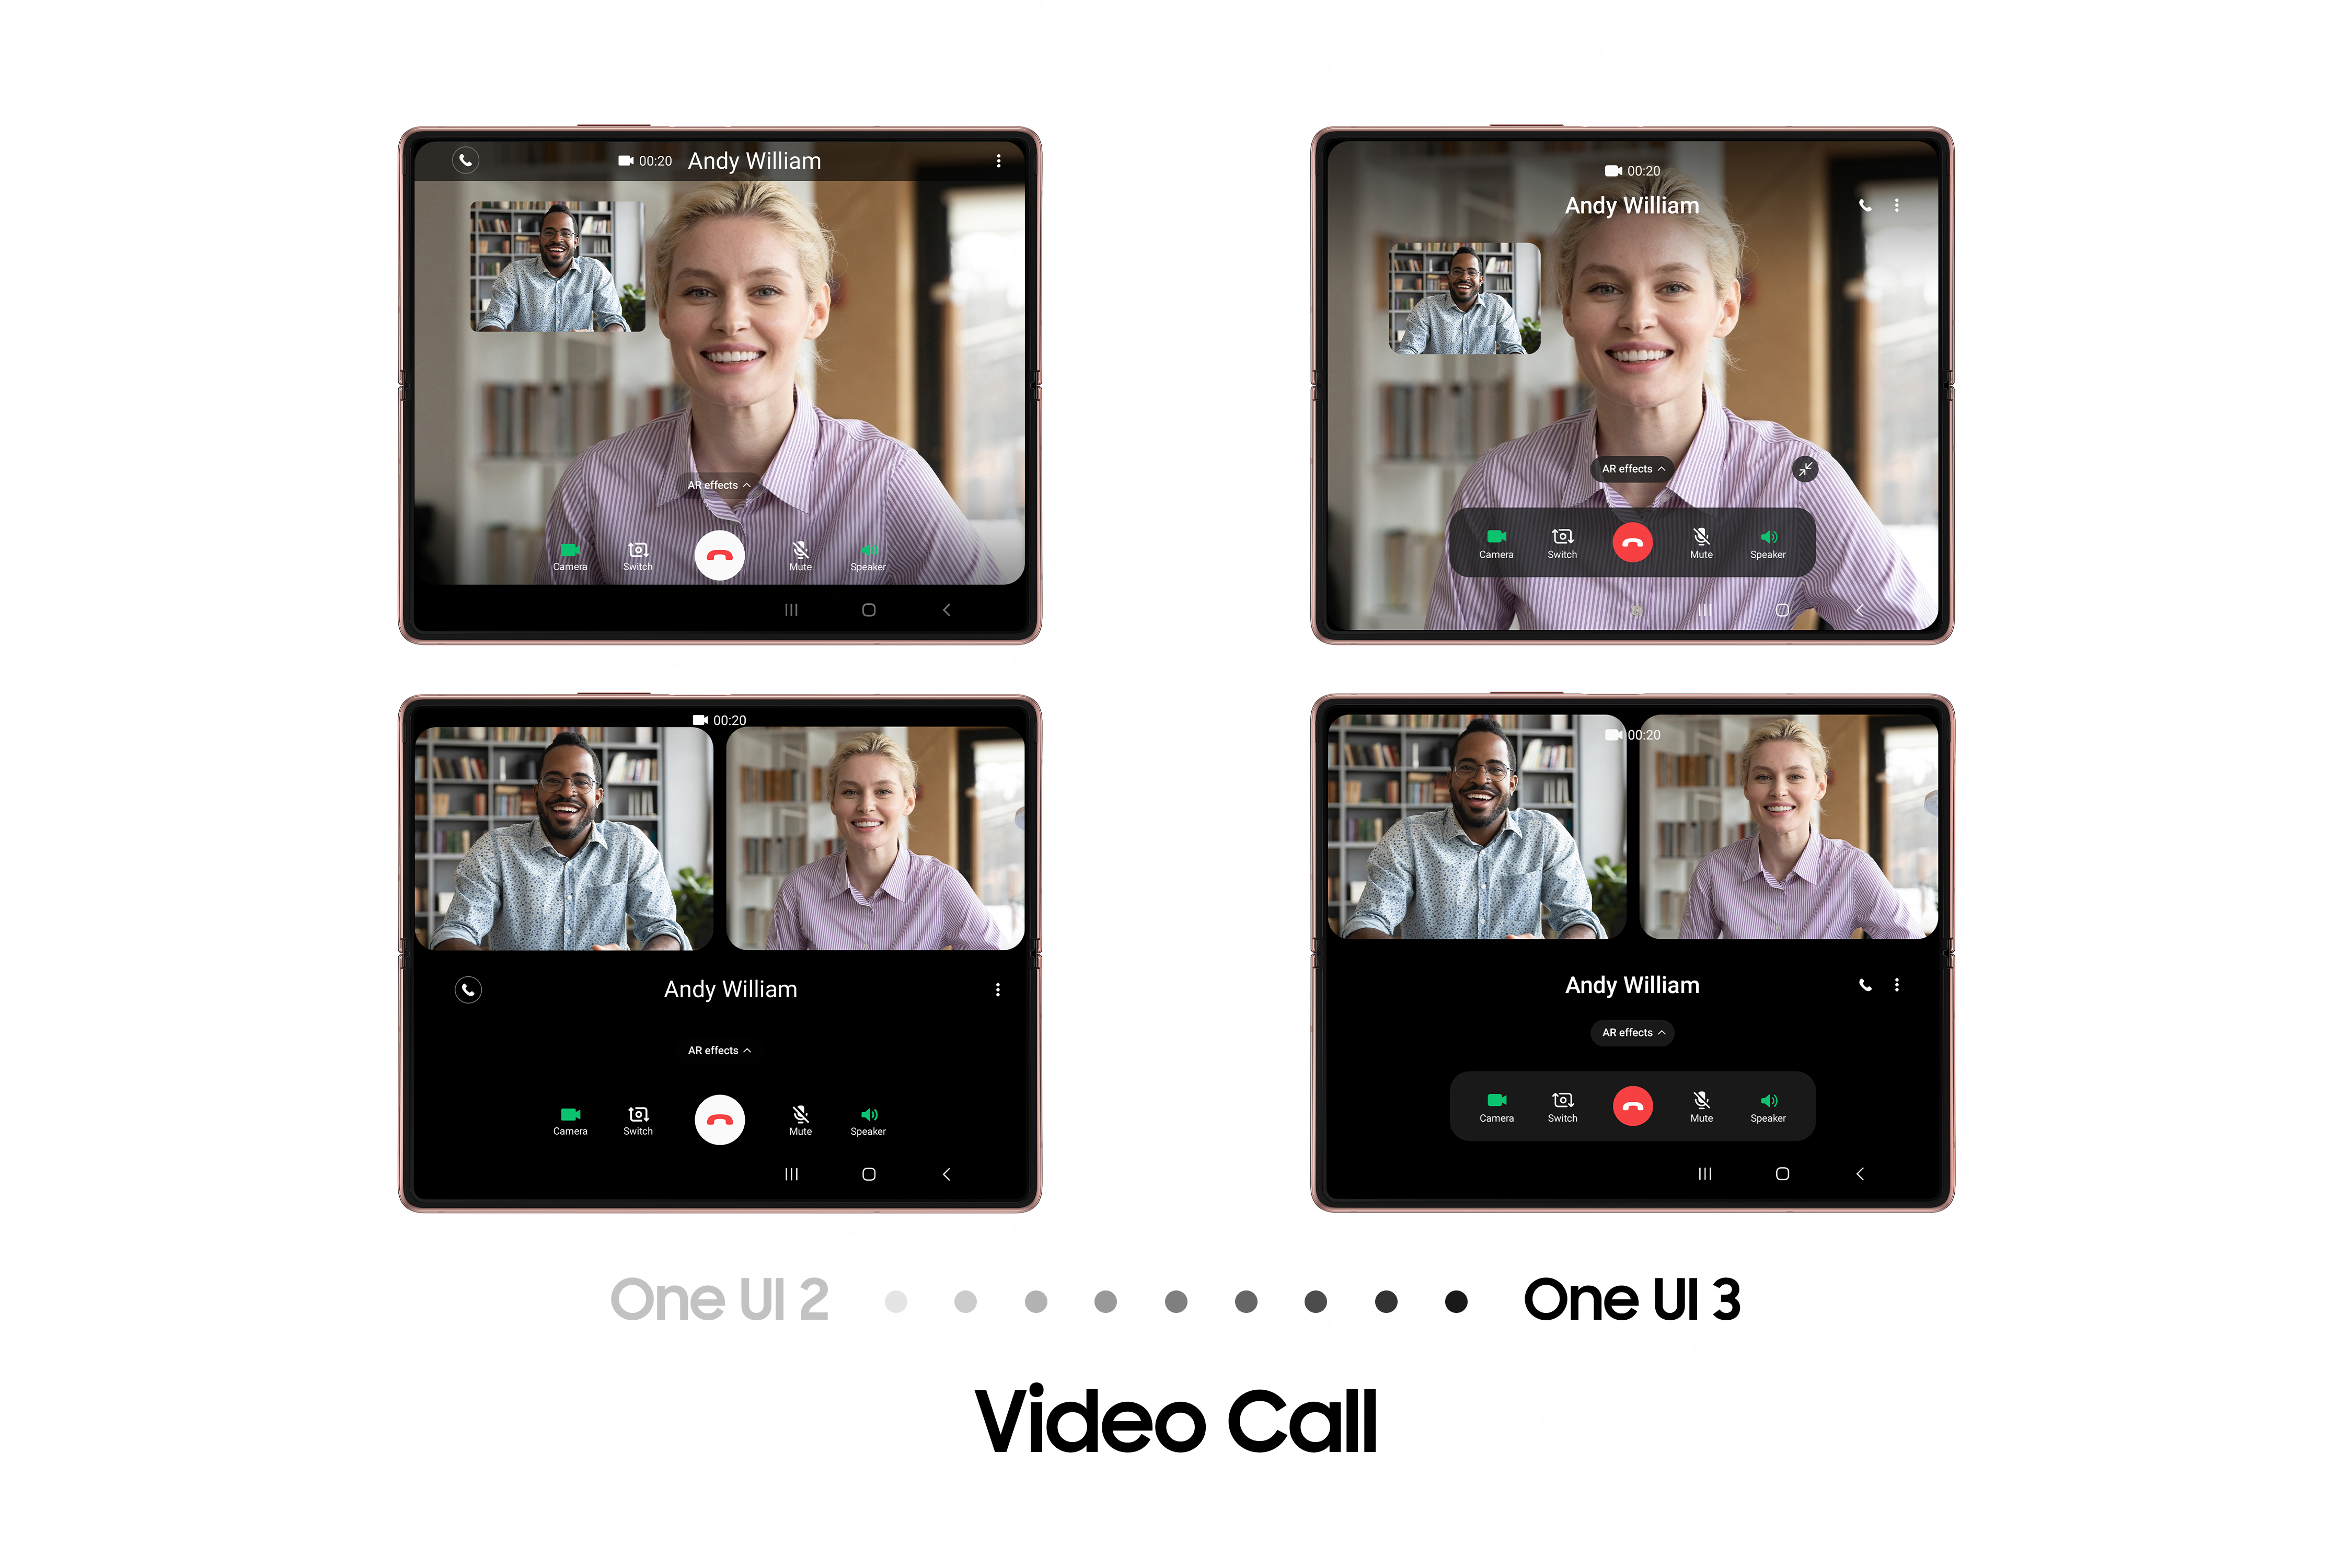 One UI 3 Brings Seamless Continuity and Intuitive Interactions to the Galaxy Z Fold2: Video Call